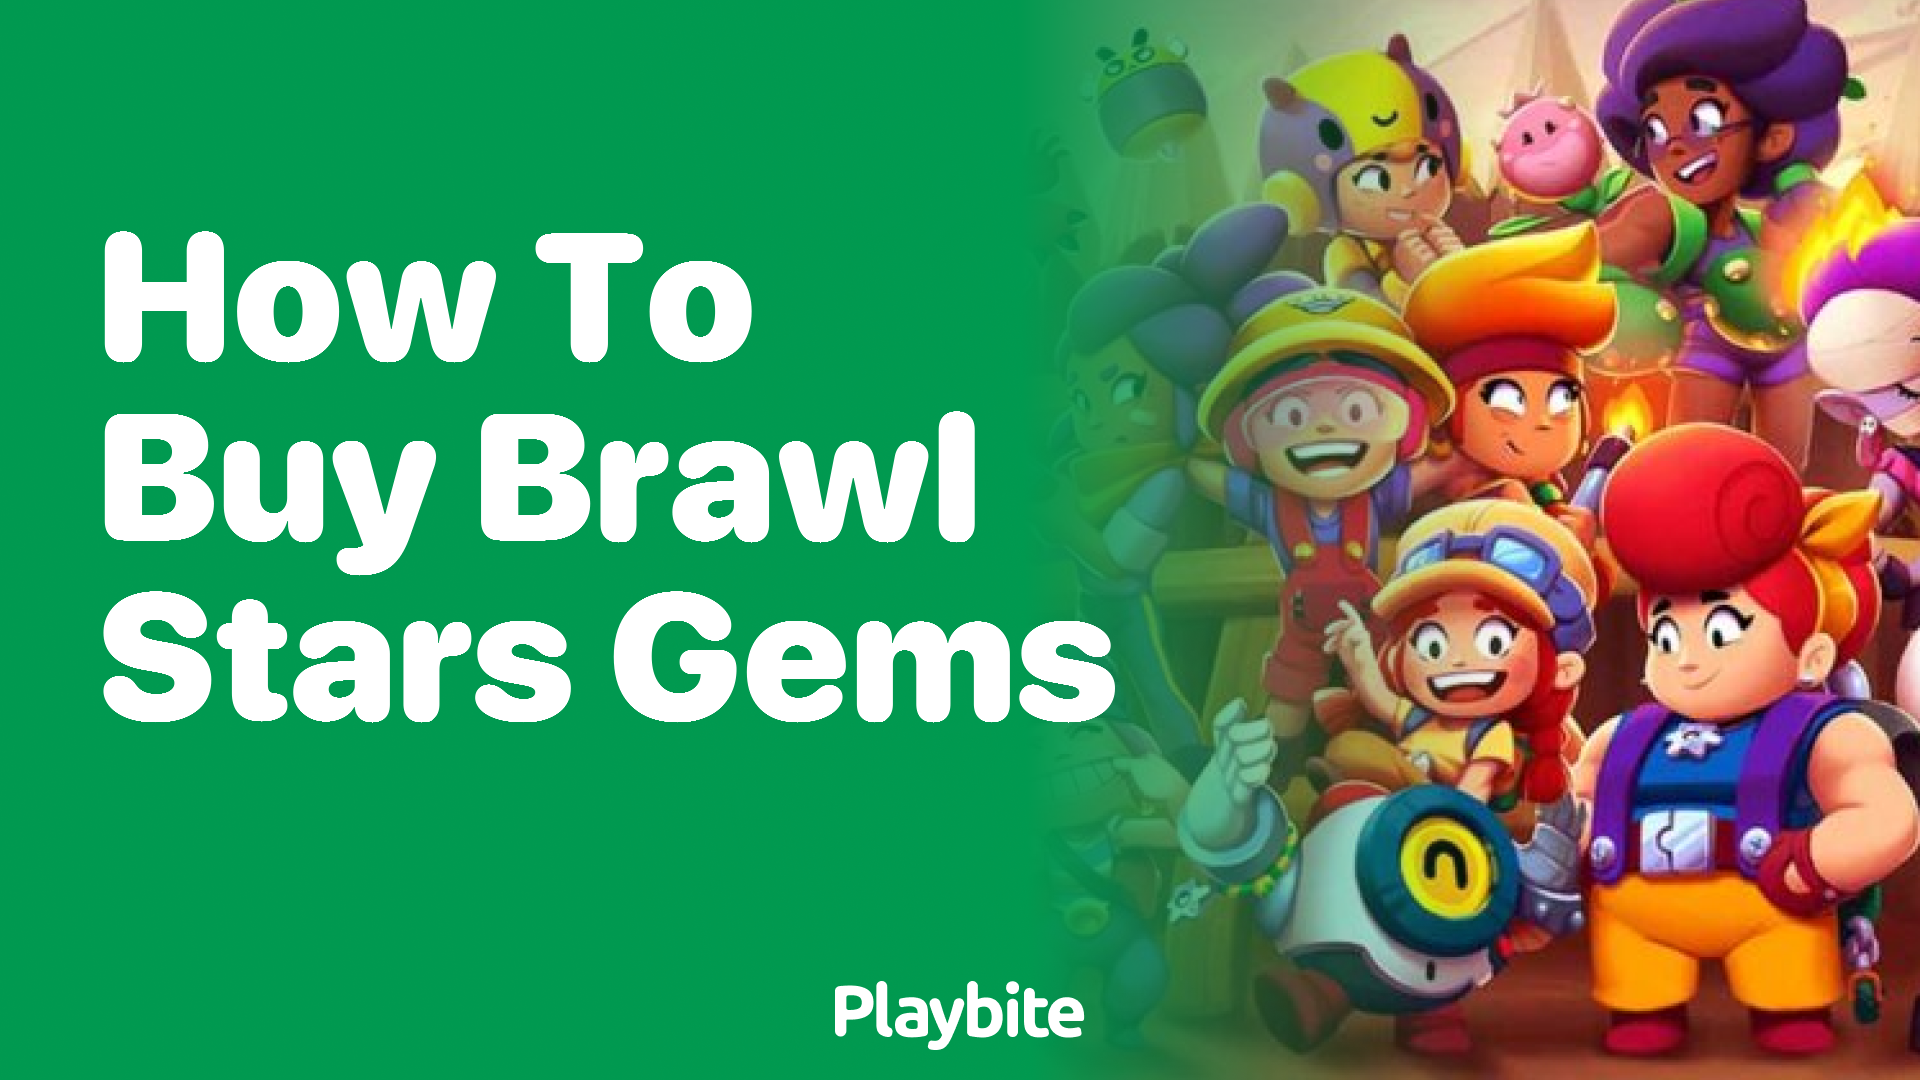 Guide for Brawl Stars - Apps on Google Play